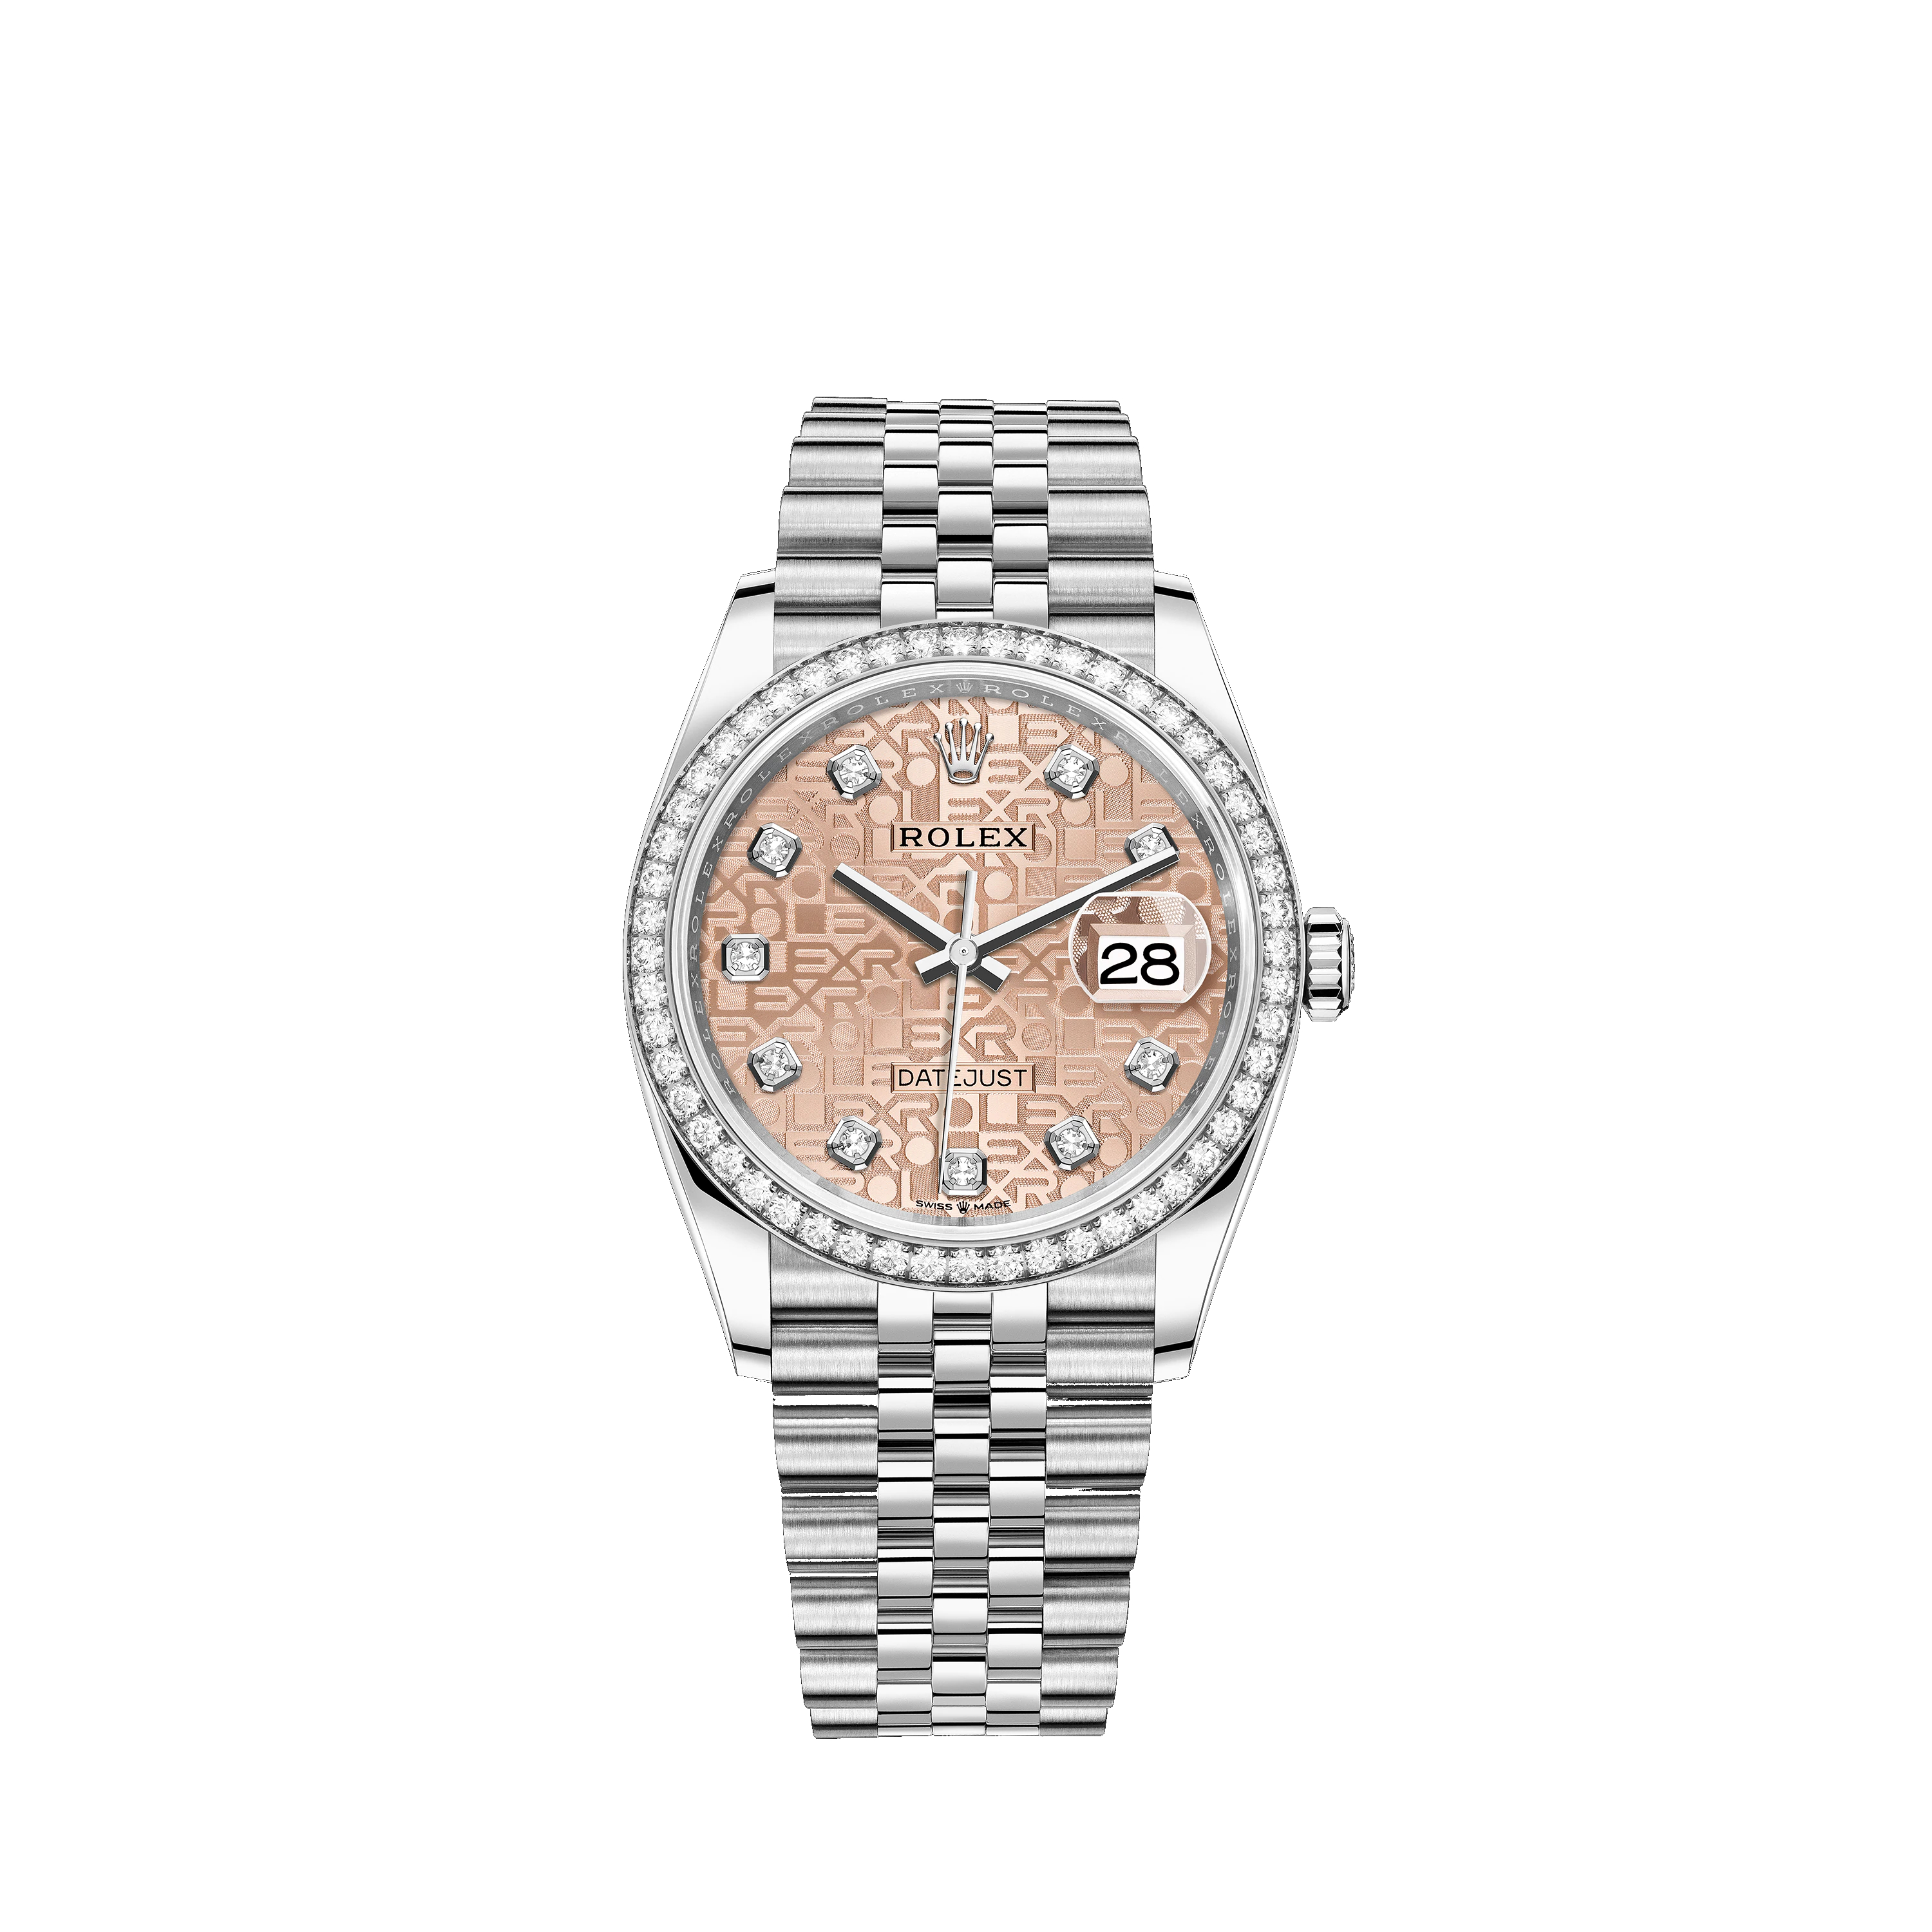 Datejust 36 126284RBR White Gold, Stainless Steel & Diamonds Watch (Pink Jubilee Design Set with Diamonds)